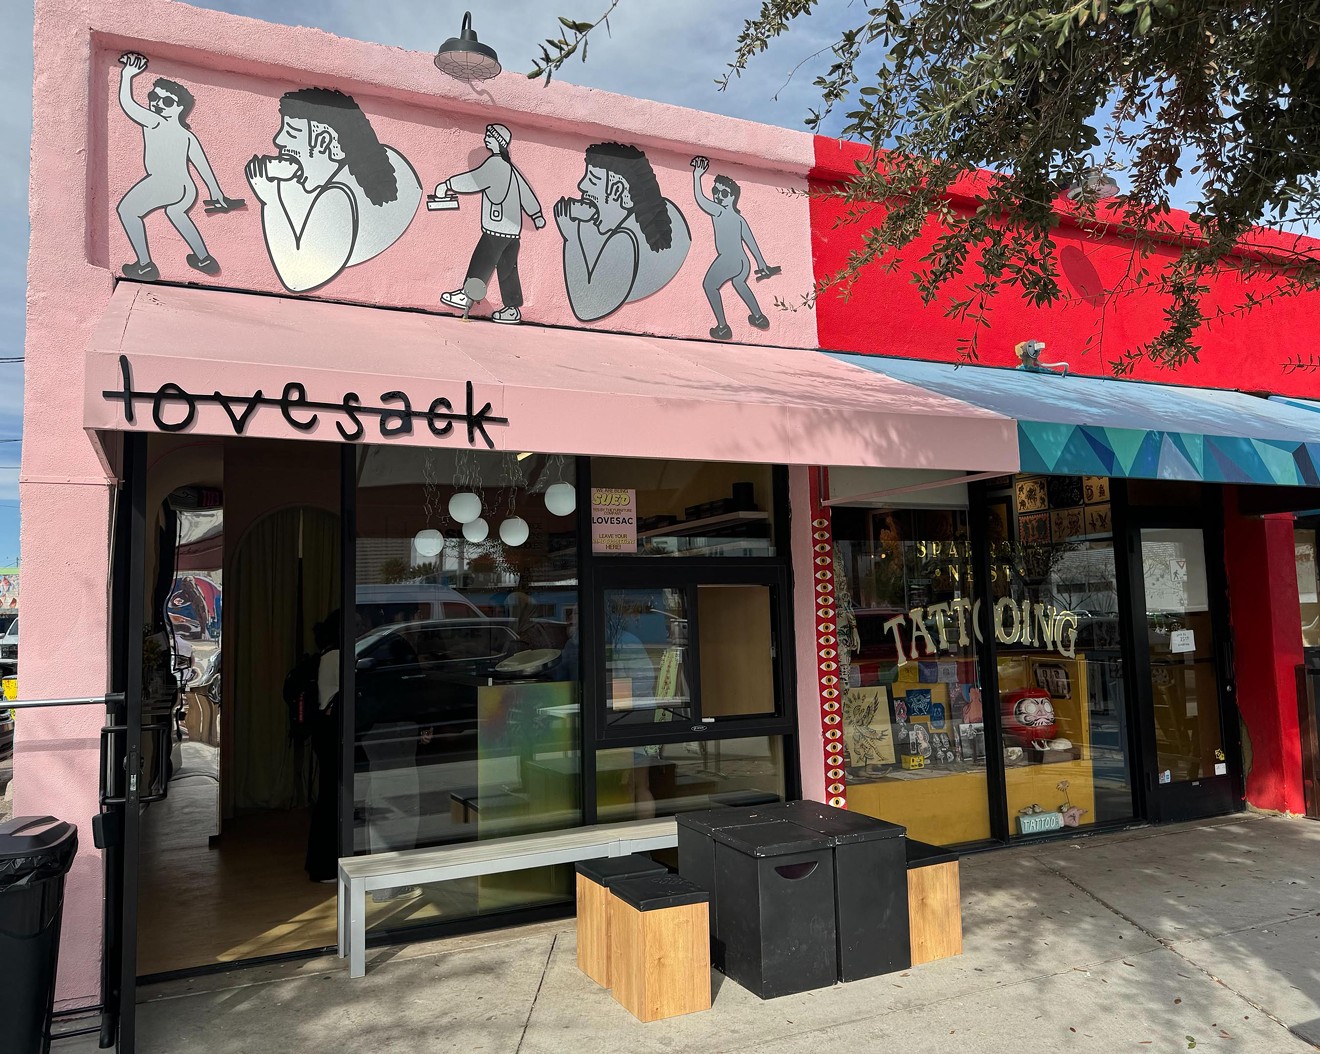 Lovesack Dumpling, which opened on Roosevelt Row on Feb. 24, has changed its name. Facing a lawsuit from Lovesac, the eatery changed its name to Lovebite Dumpling.